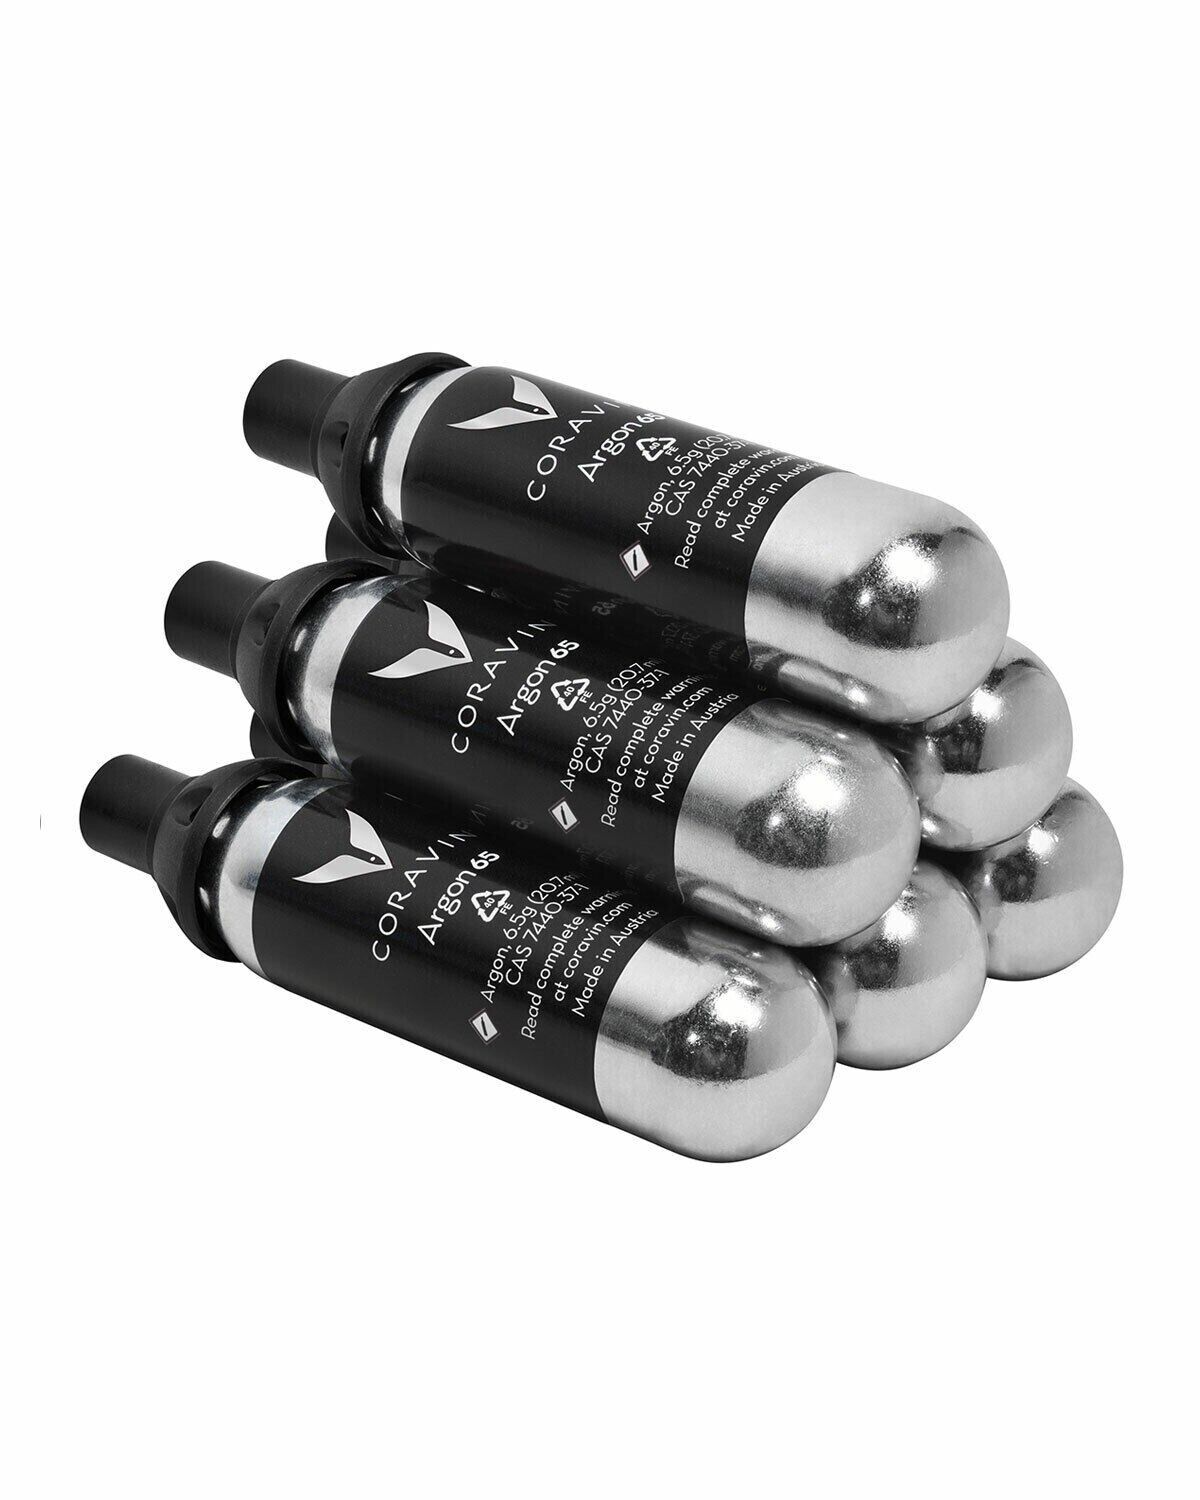 Coravin Argon Gas Capsules - 6 Pack *NEW*